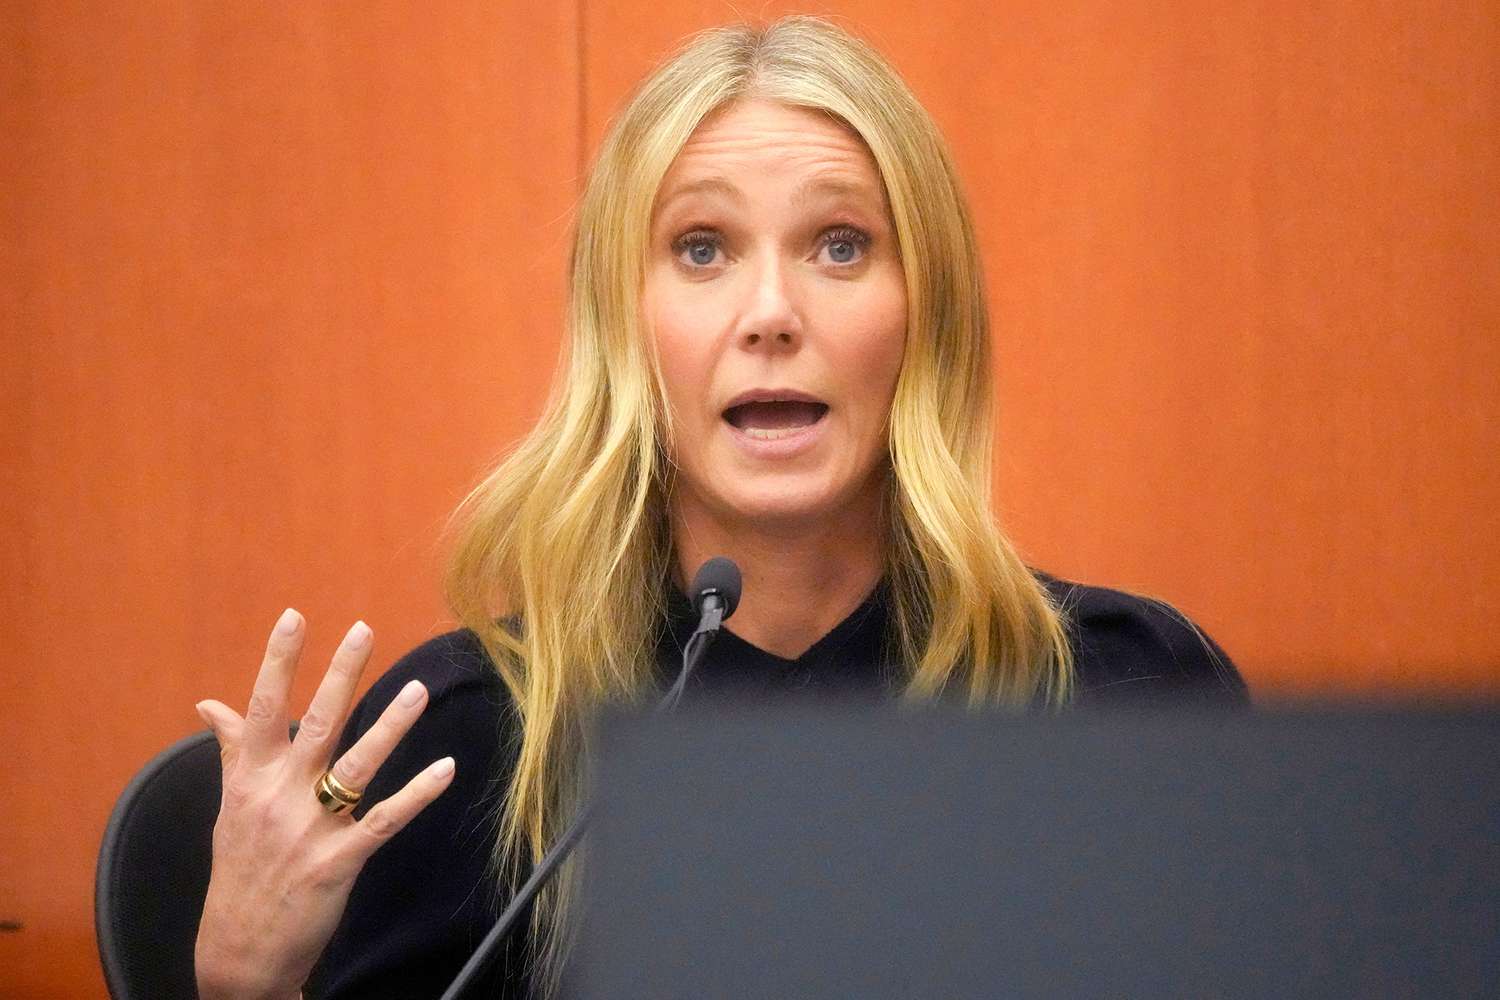 Gwyneth Paltrow takes the stand to give her side of 2016 ski crash